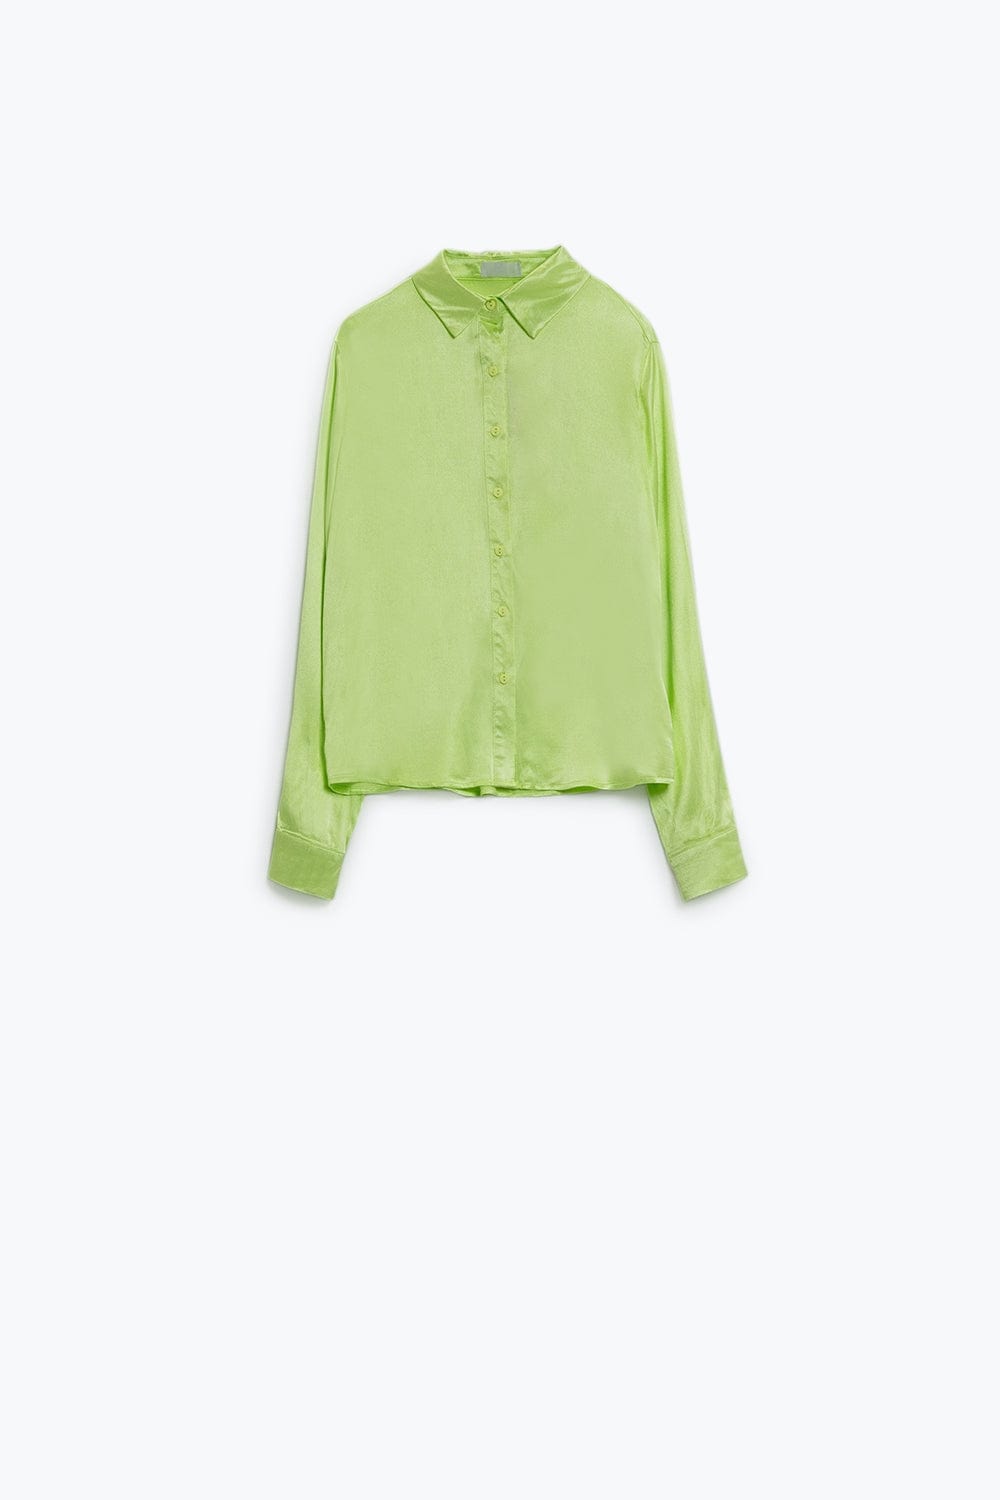 Q2 Women's Blouse Long Sleeve Button Up Satin Blouse With Polo Collar In The Color Lime